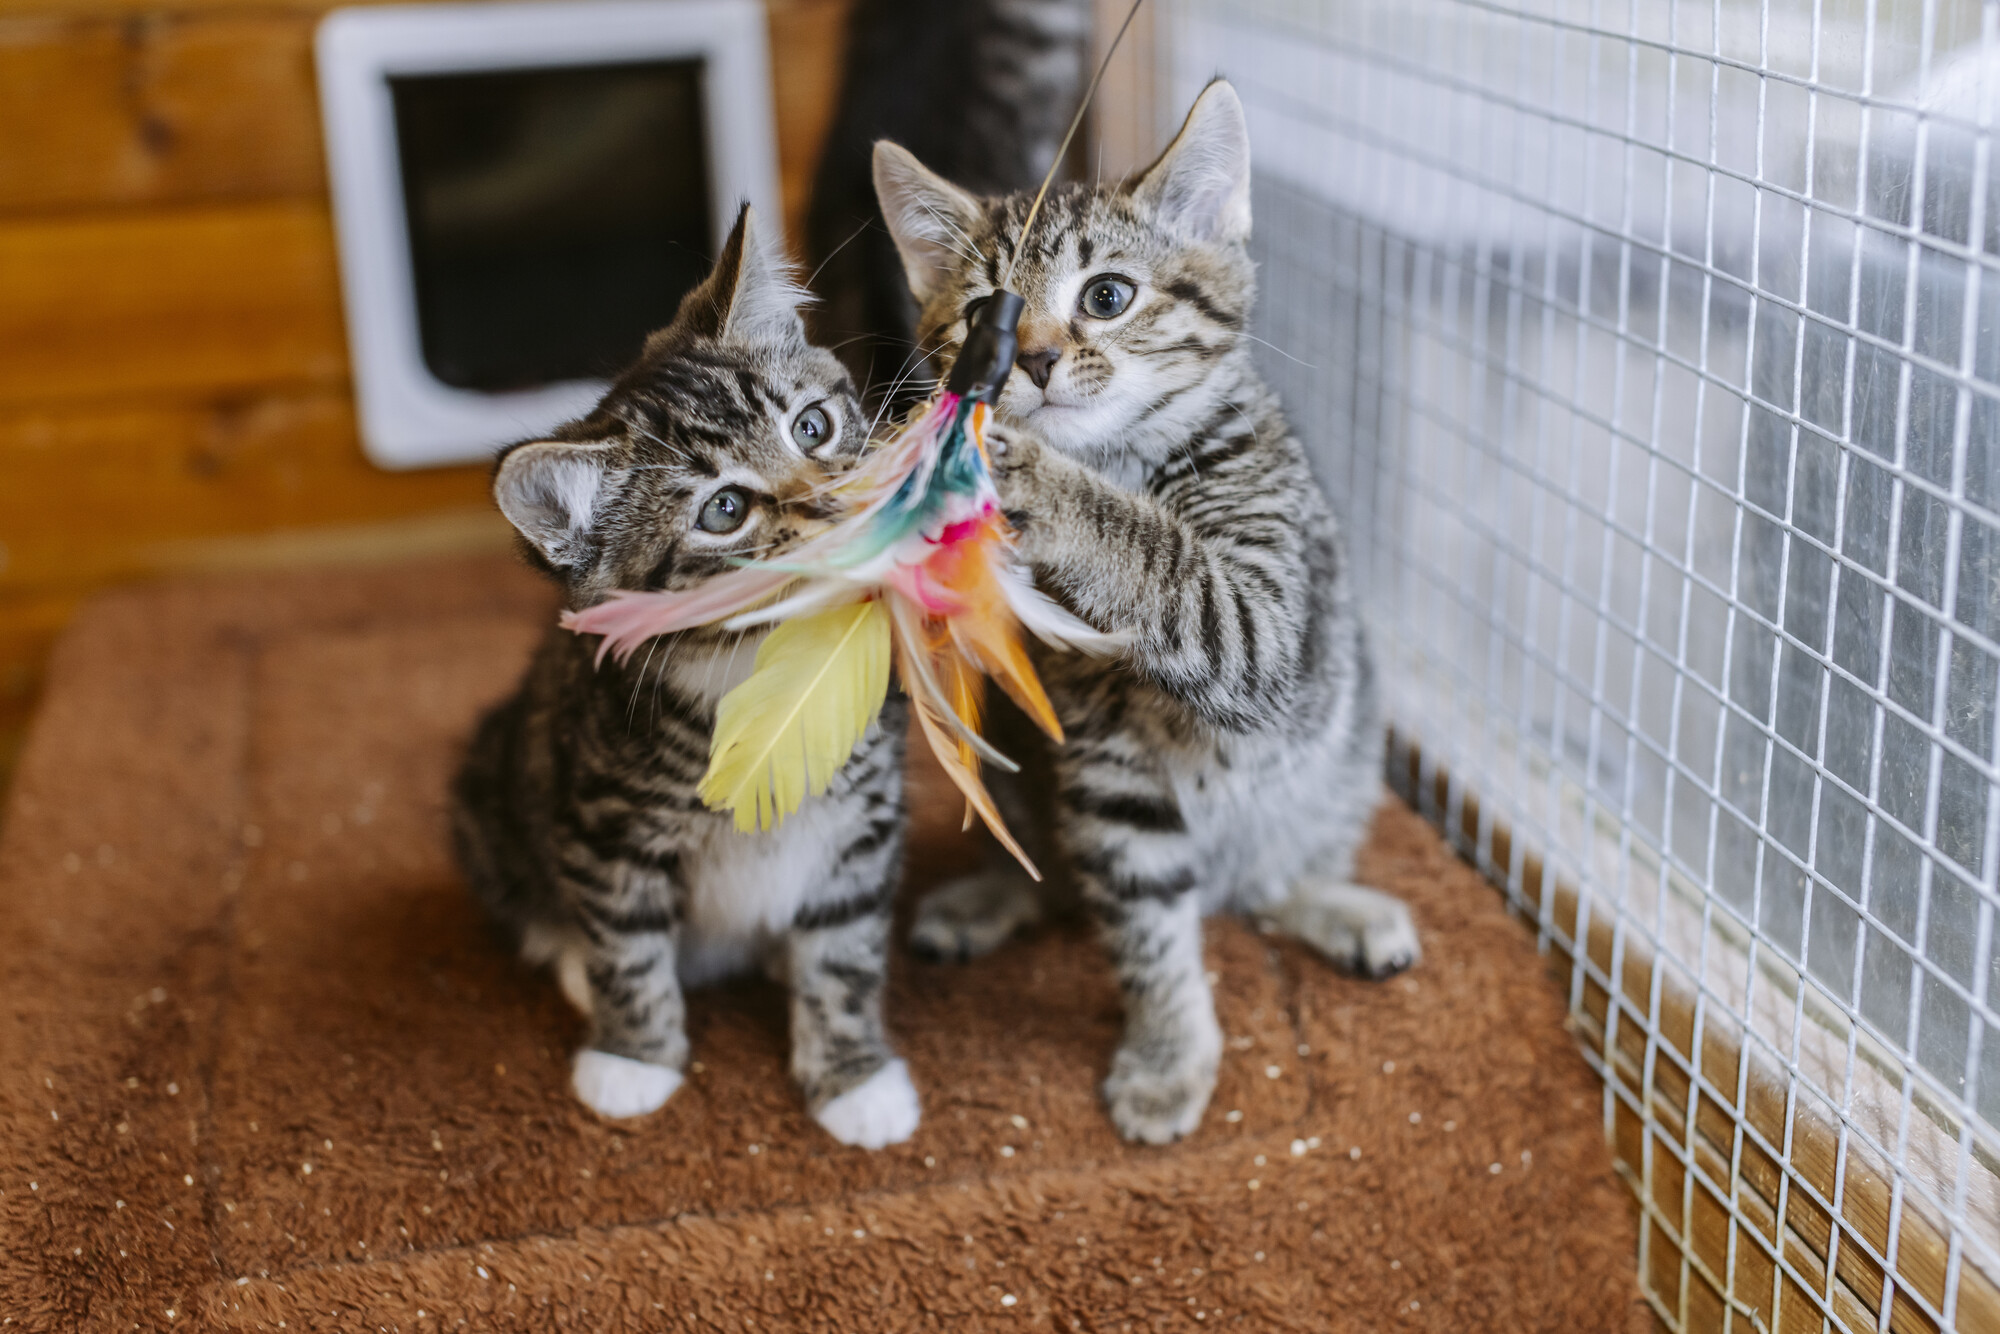 Two of the kittens playing in their cat chalet with a feather rod toy